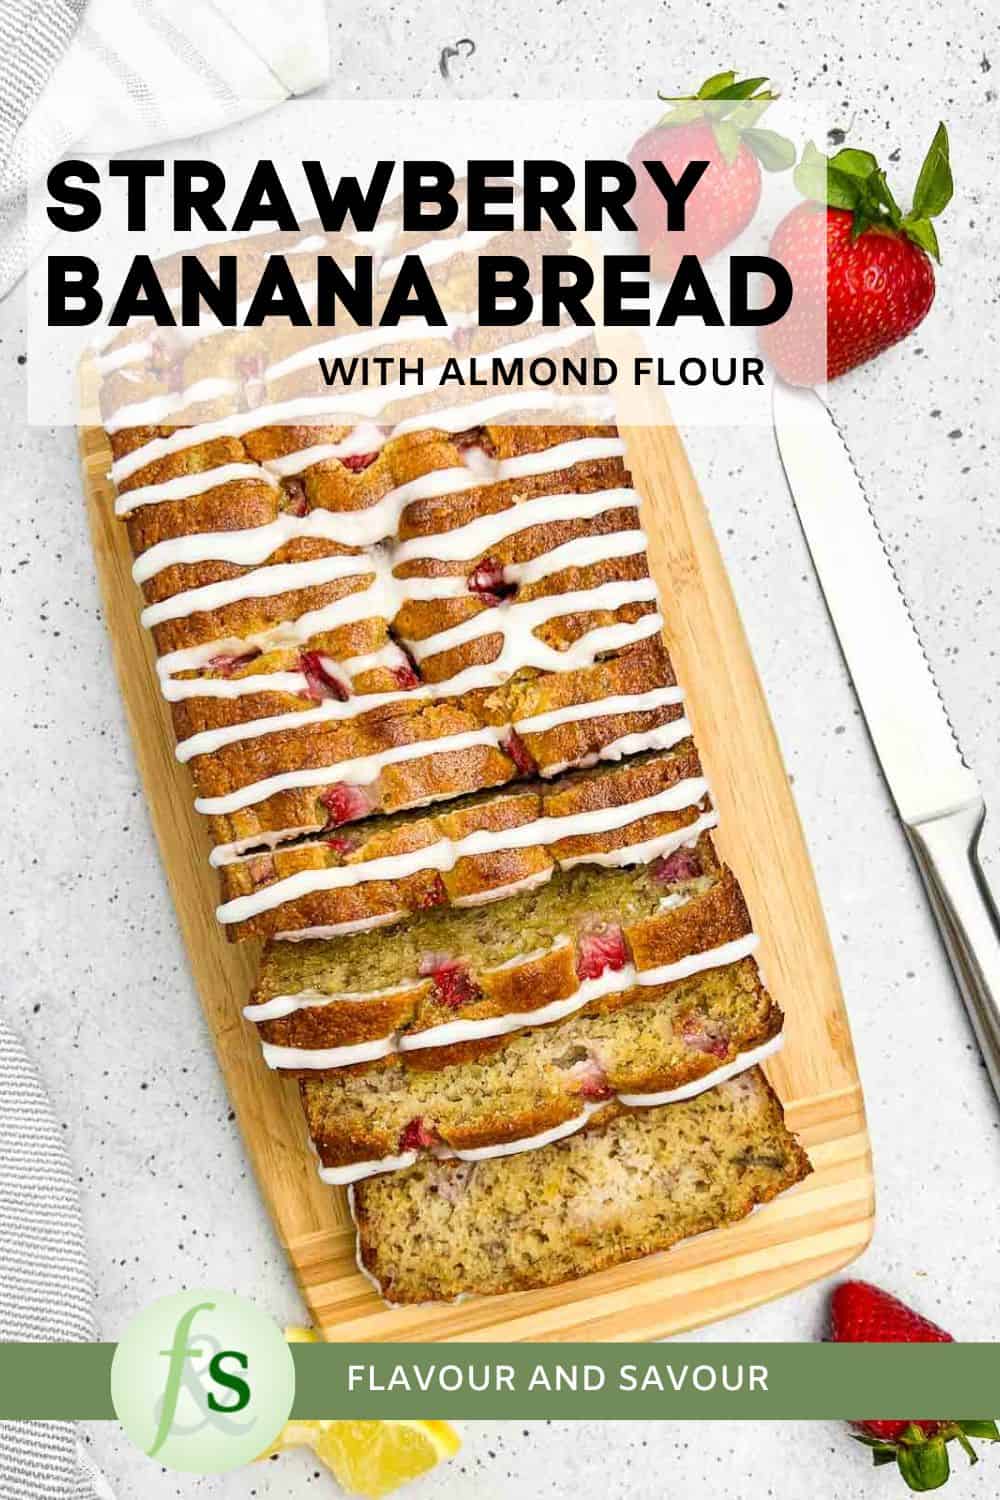 Image with text for Almond Flour Strawberry Banana Bread with Lemon Glaze.